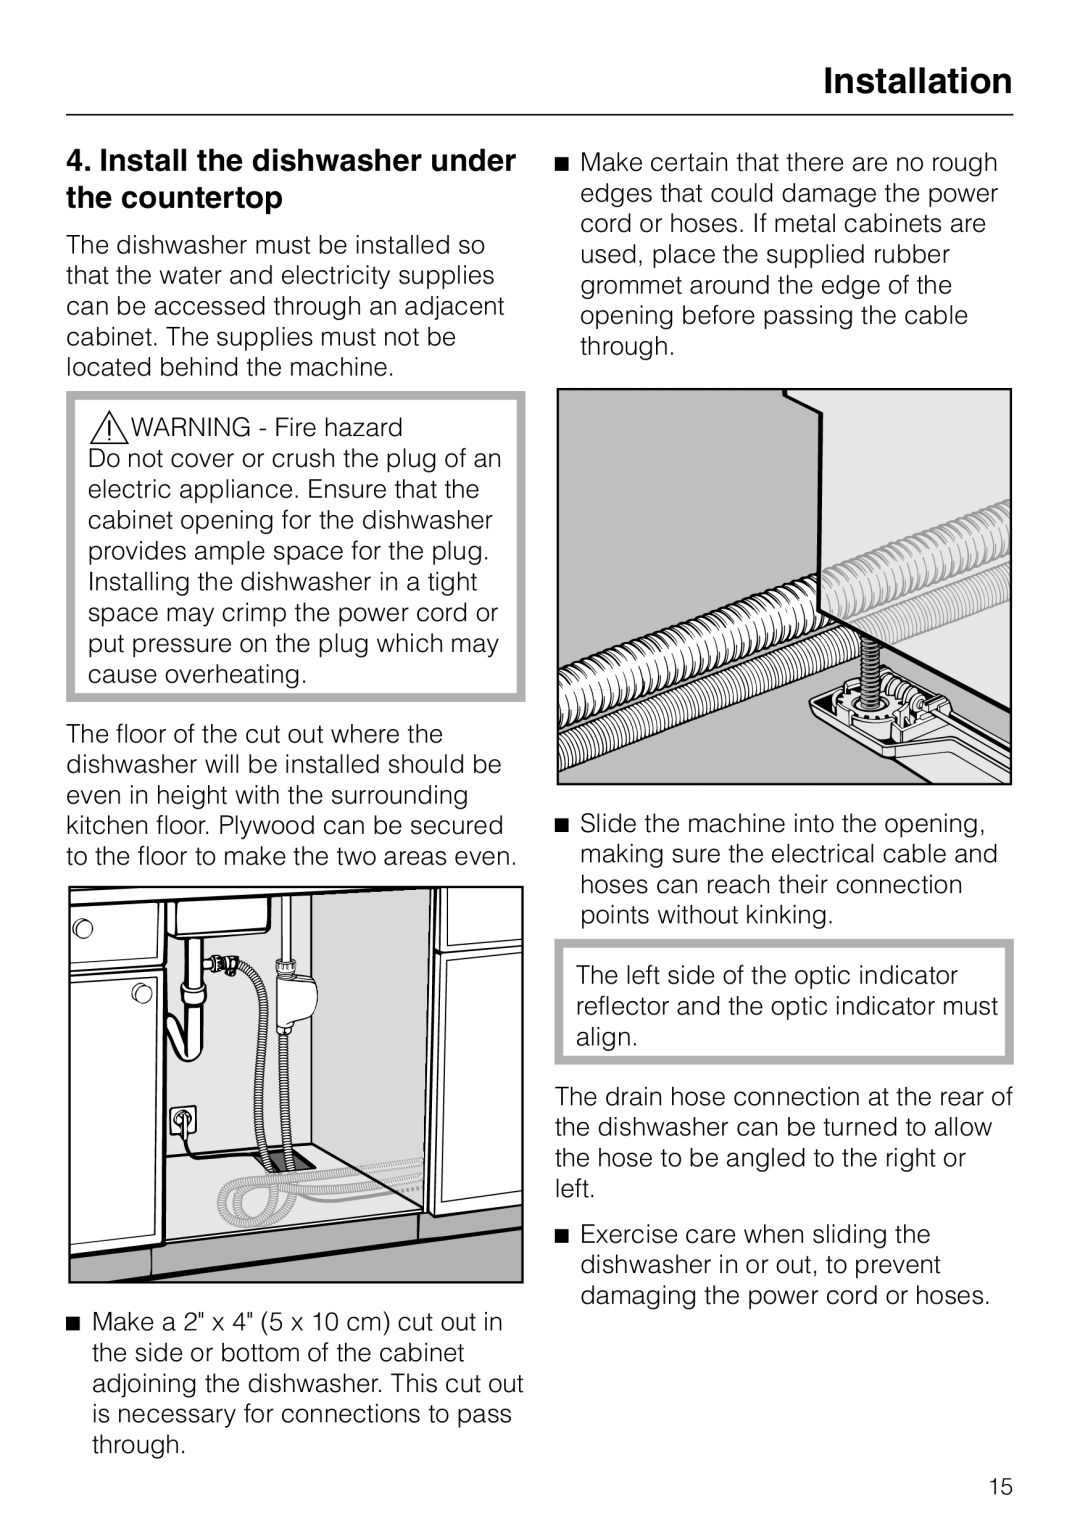 Miele HG01 installation instructions Install the dishwasher under the countertop, Installation 